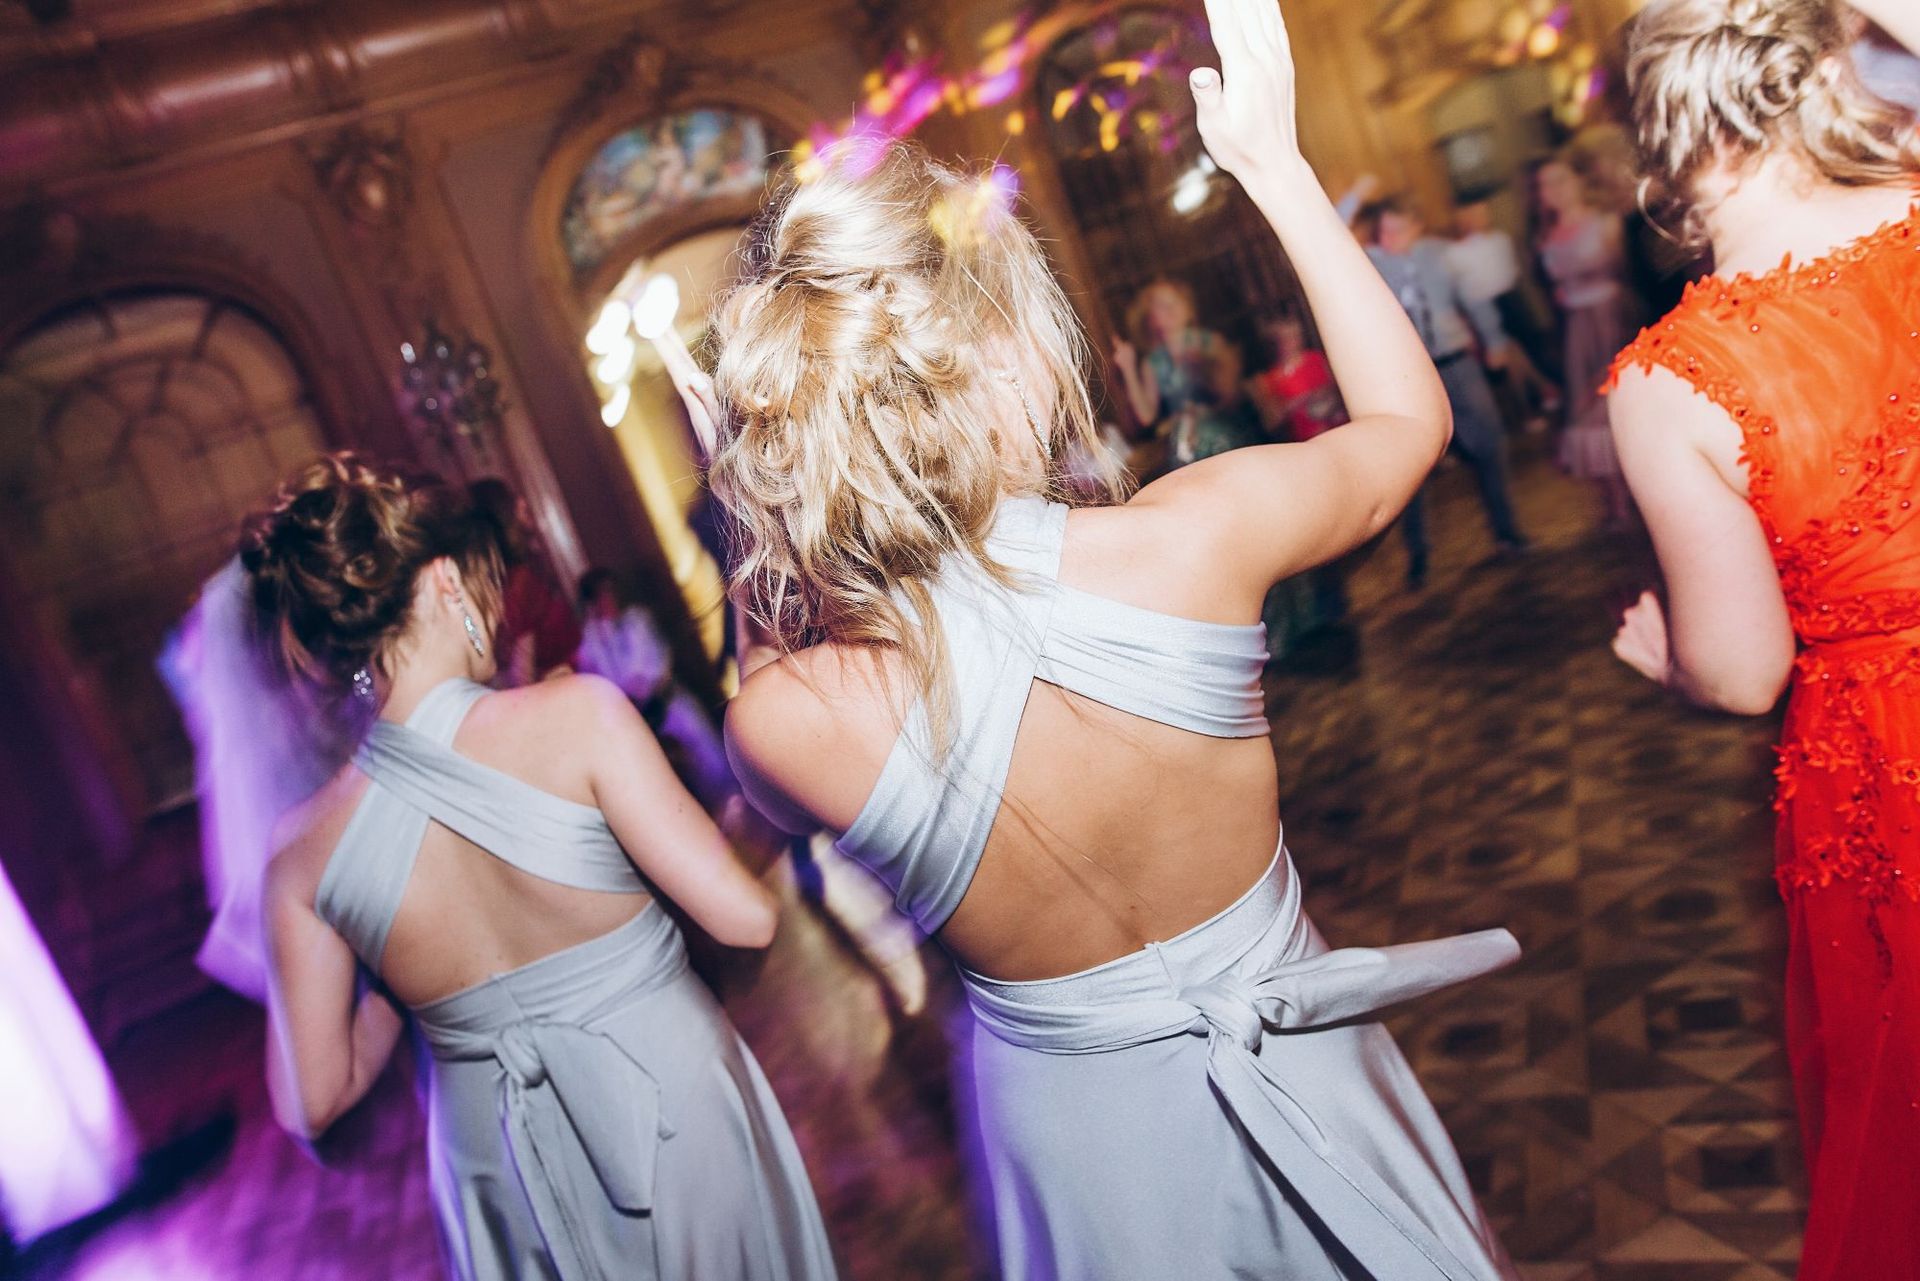 A group of women are dancing at a wedding reception.